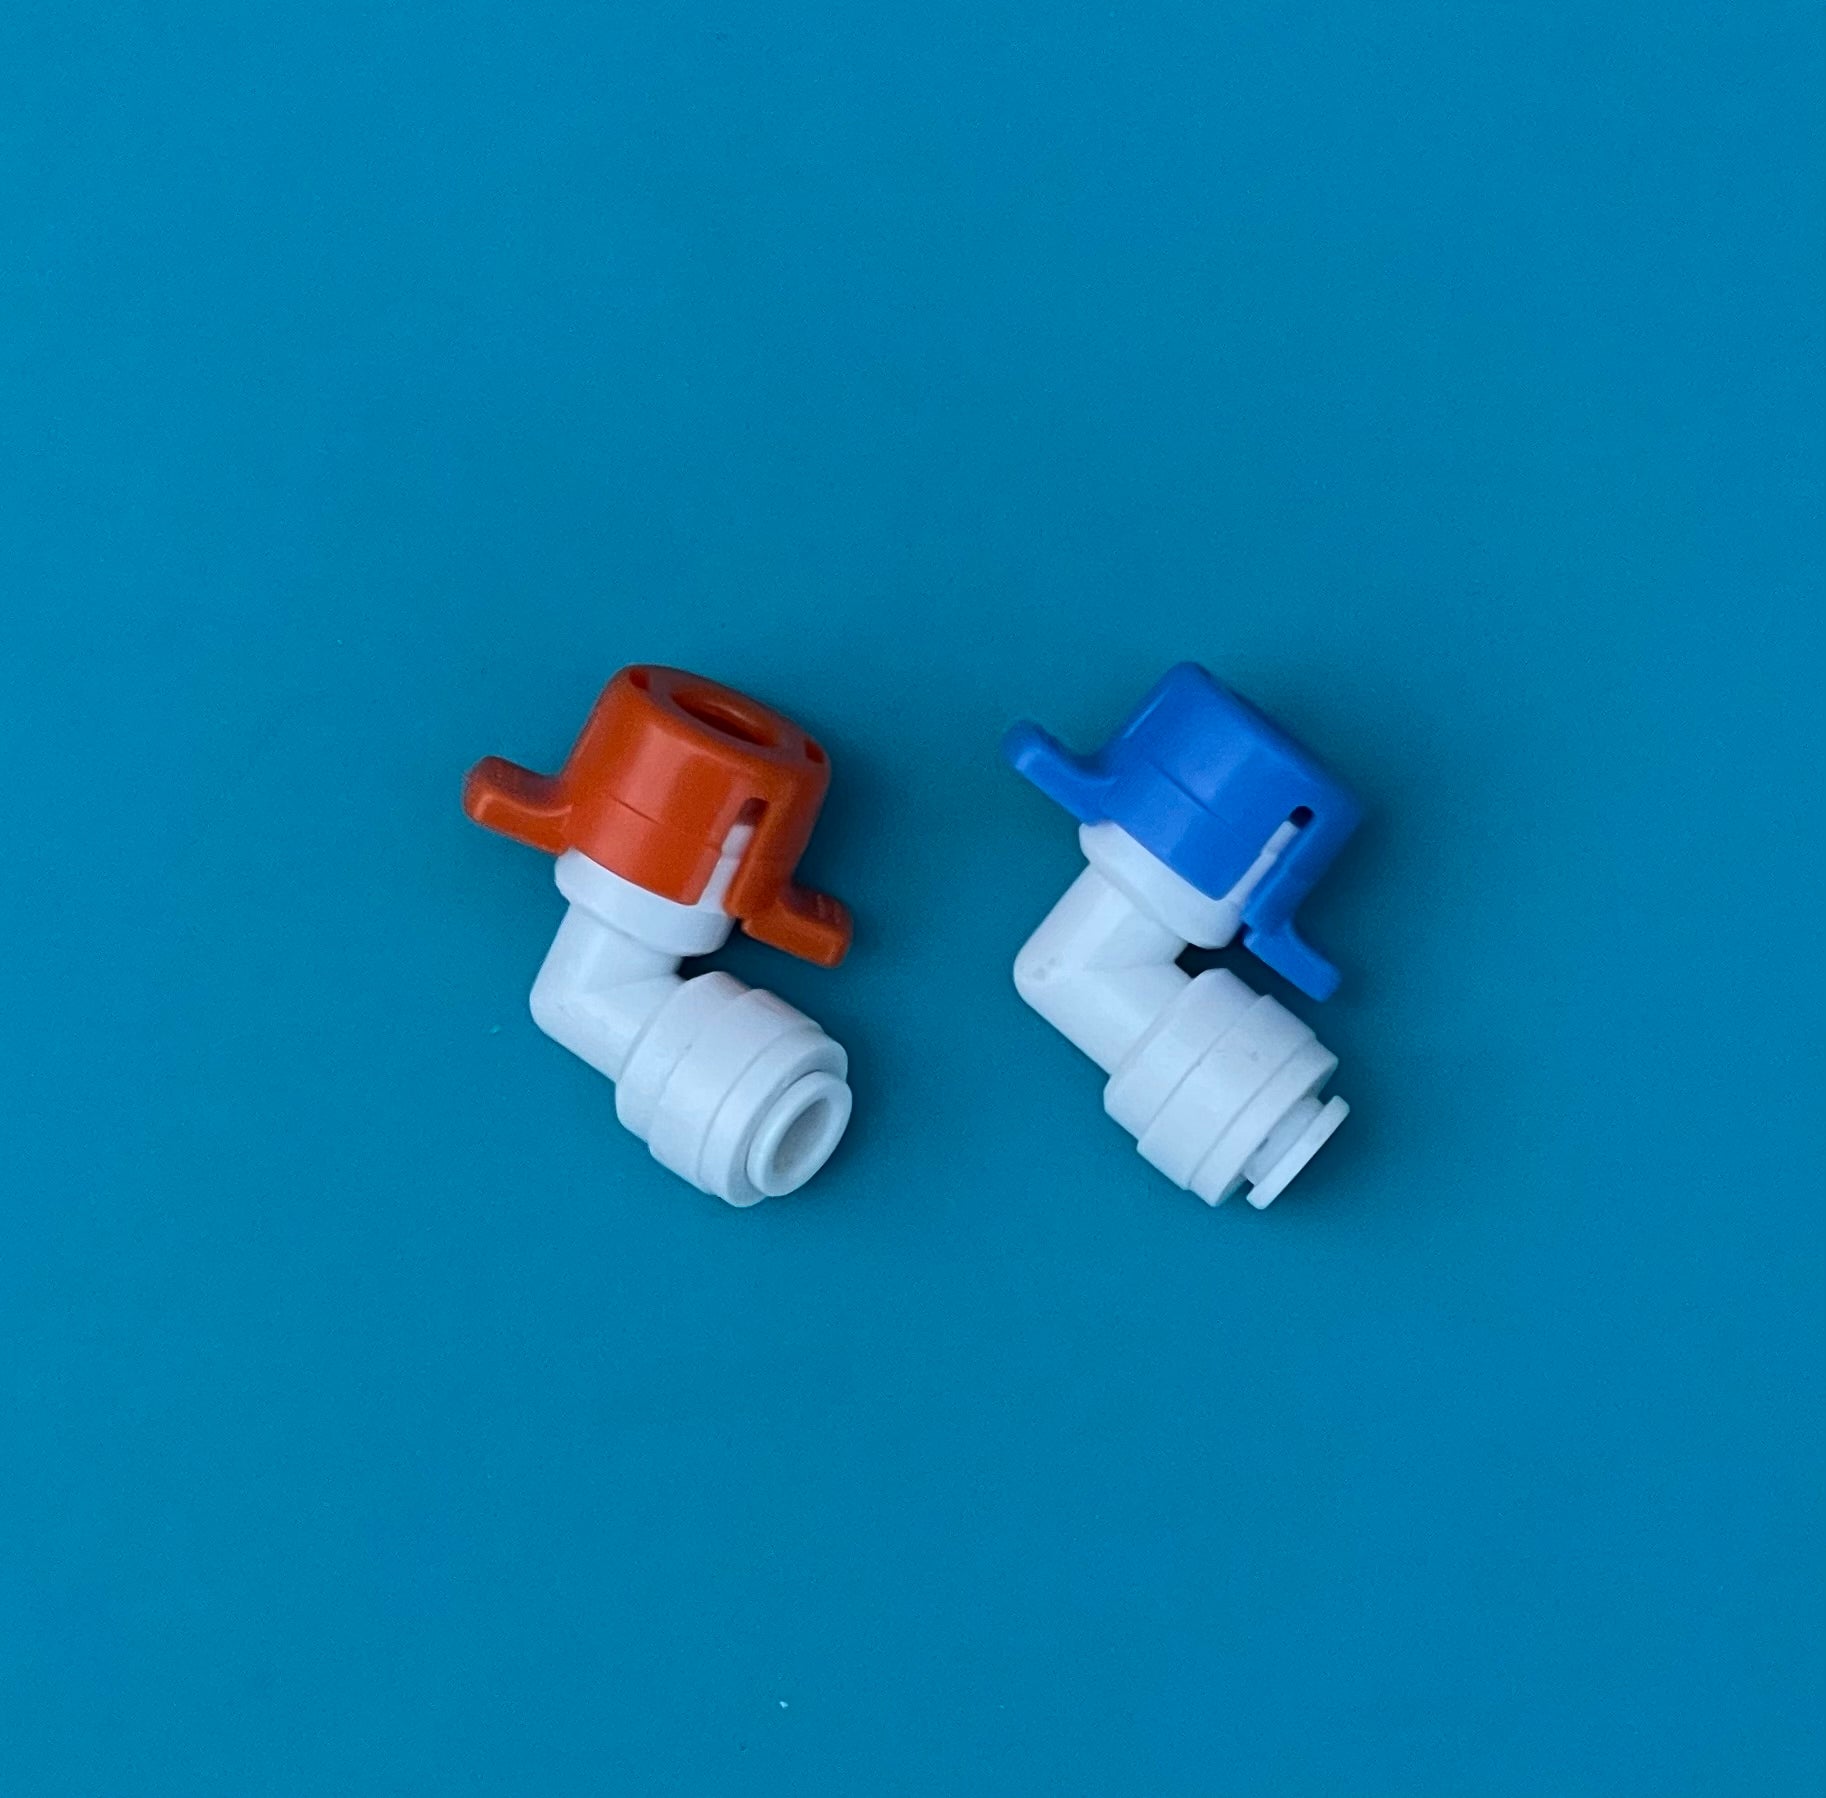 One Color coded pair of No Tool 90˚ elbow push fittings